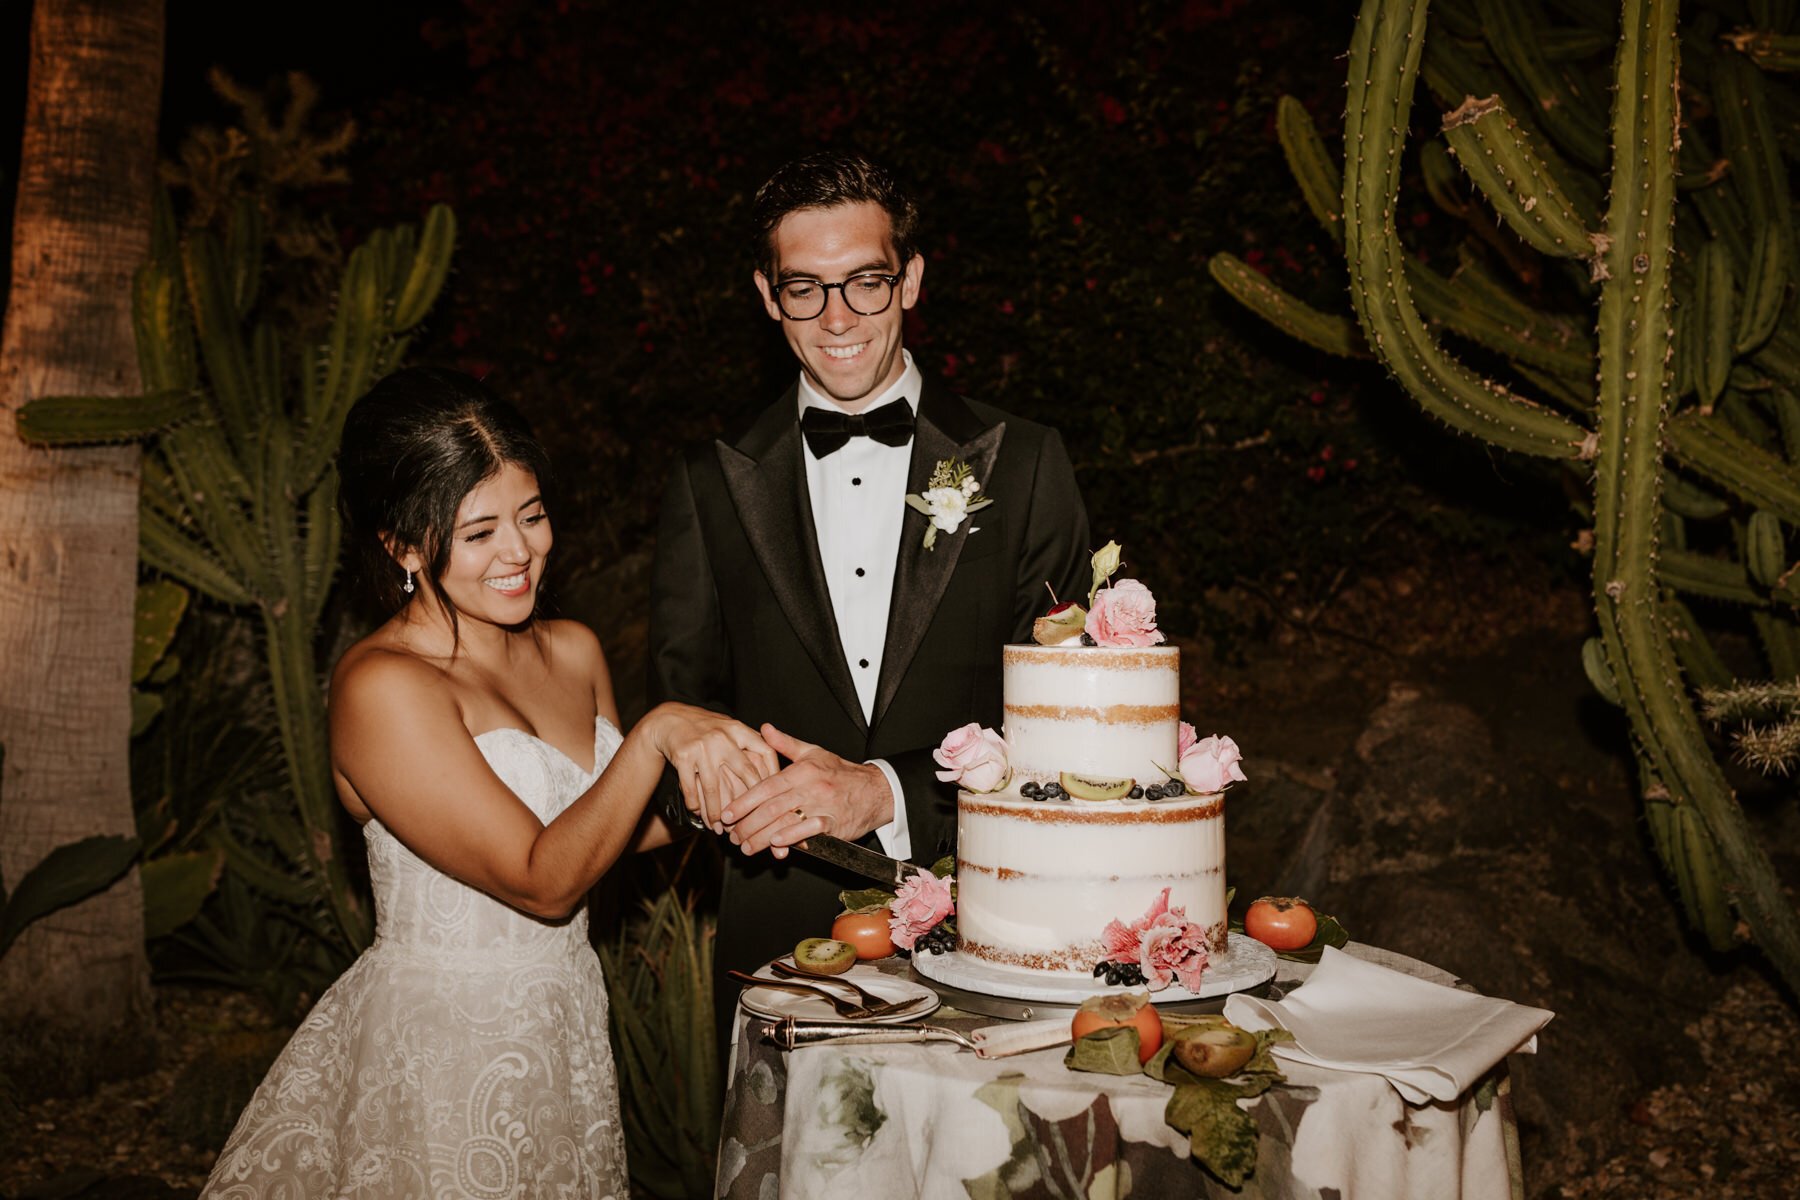 Bride and Groom cake cutting, Spencer’s Restaurant Palm Springs Wedding, Palm Springs Wedding Photographer, Tida Svy Photography